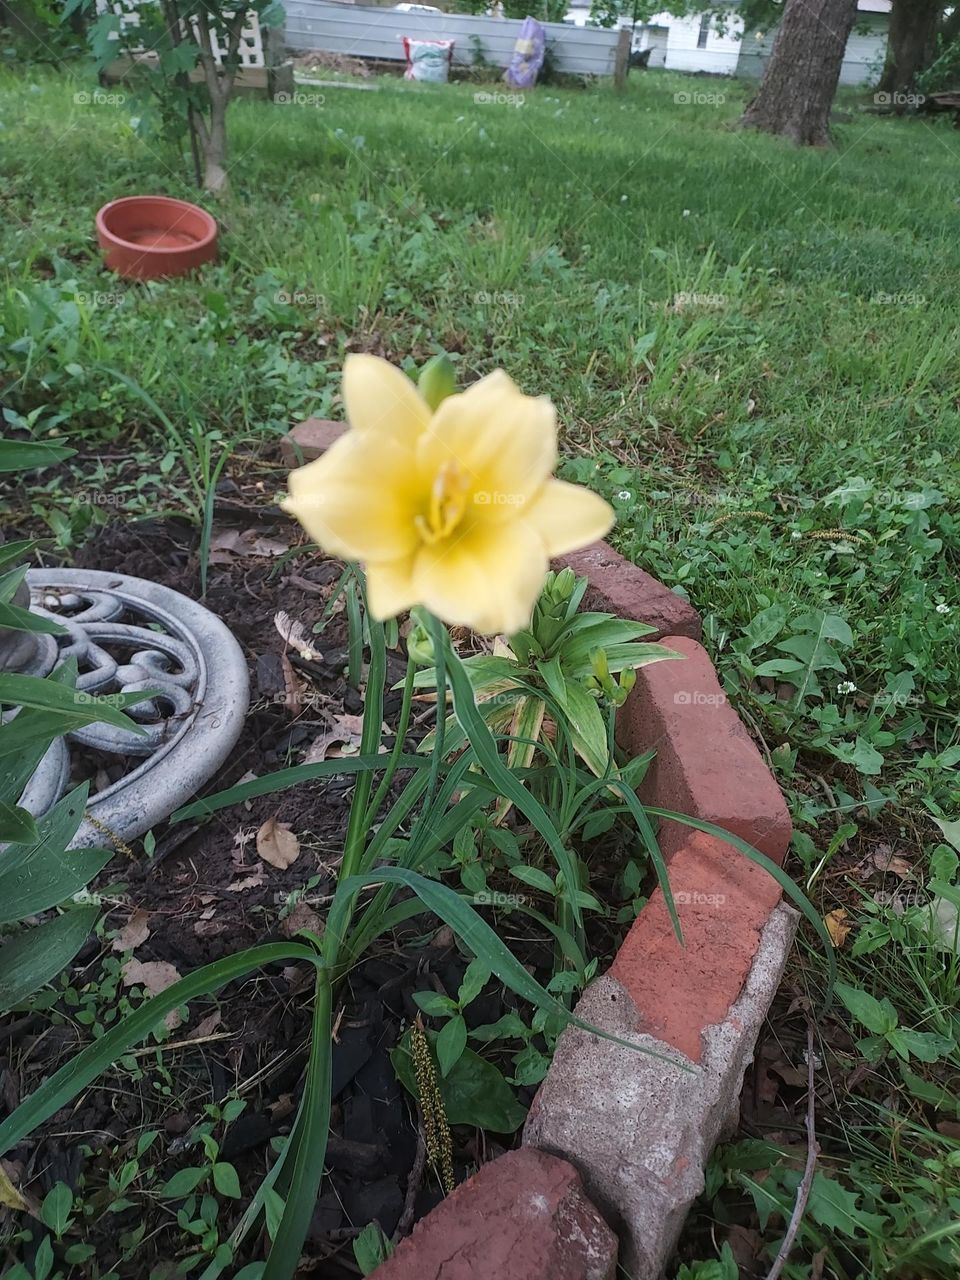 Good morning my little pretties! this may be the only sunshine I have in my yard today.